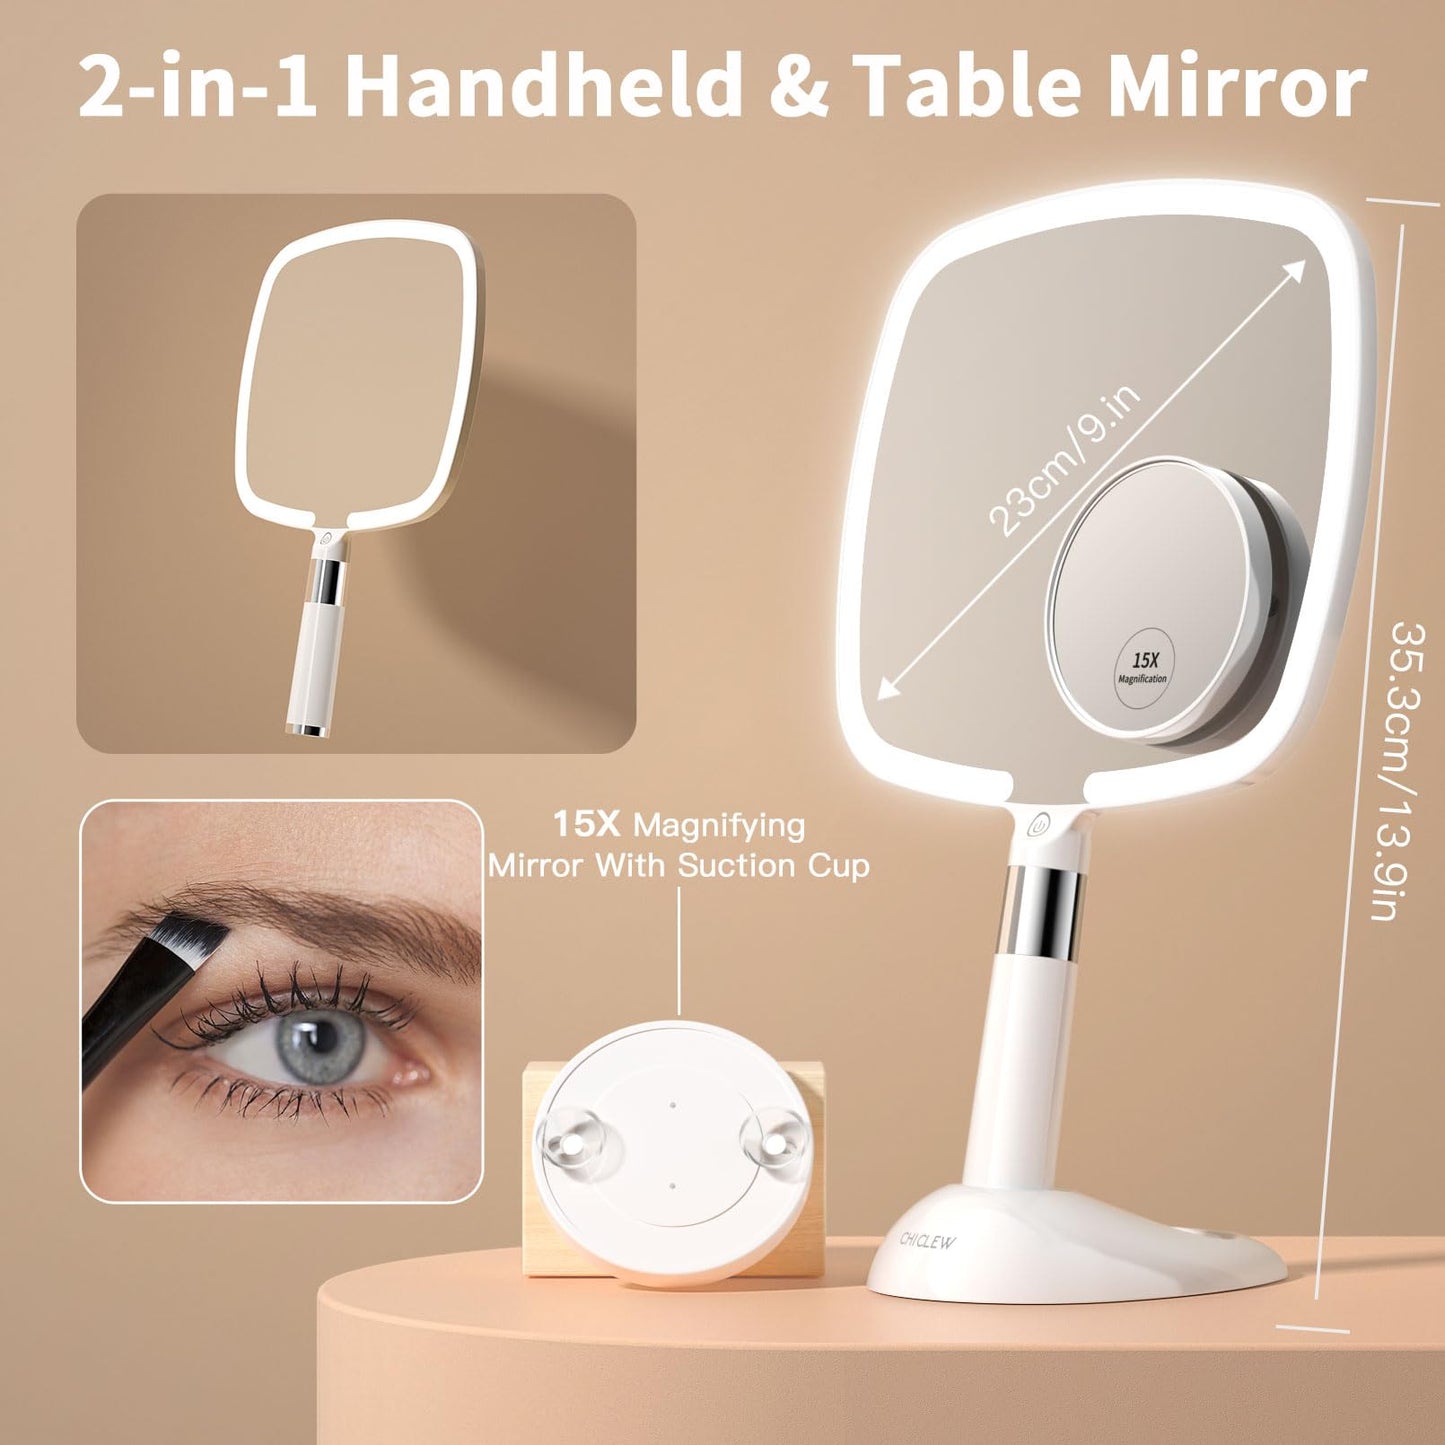 CHICLEW® Makeup Mirror with Lights, 1X/15X Magnifying Mirror with 60 LED Lights, Rechargeable 2 in 1 Hand held and Table Light Up Mirrors for Makeup, 3 Colors Lighting Modes, Stepless Dimming